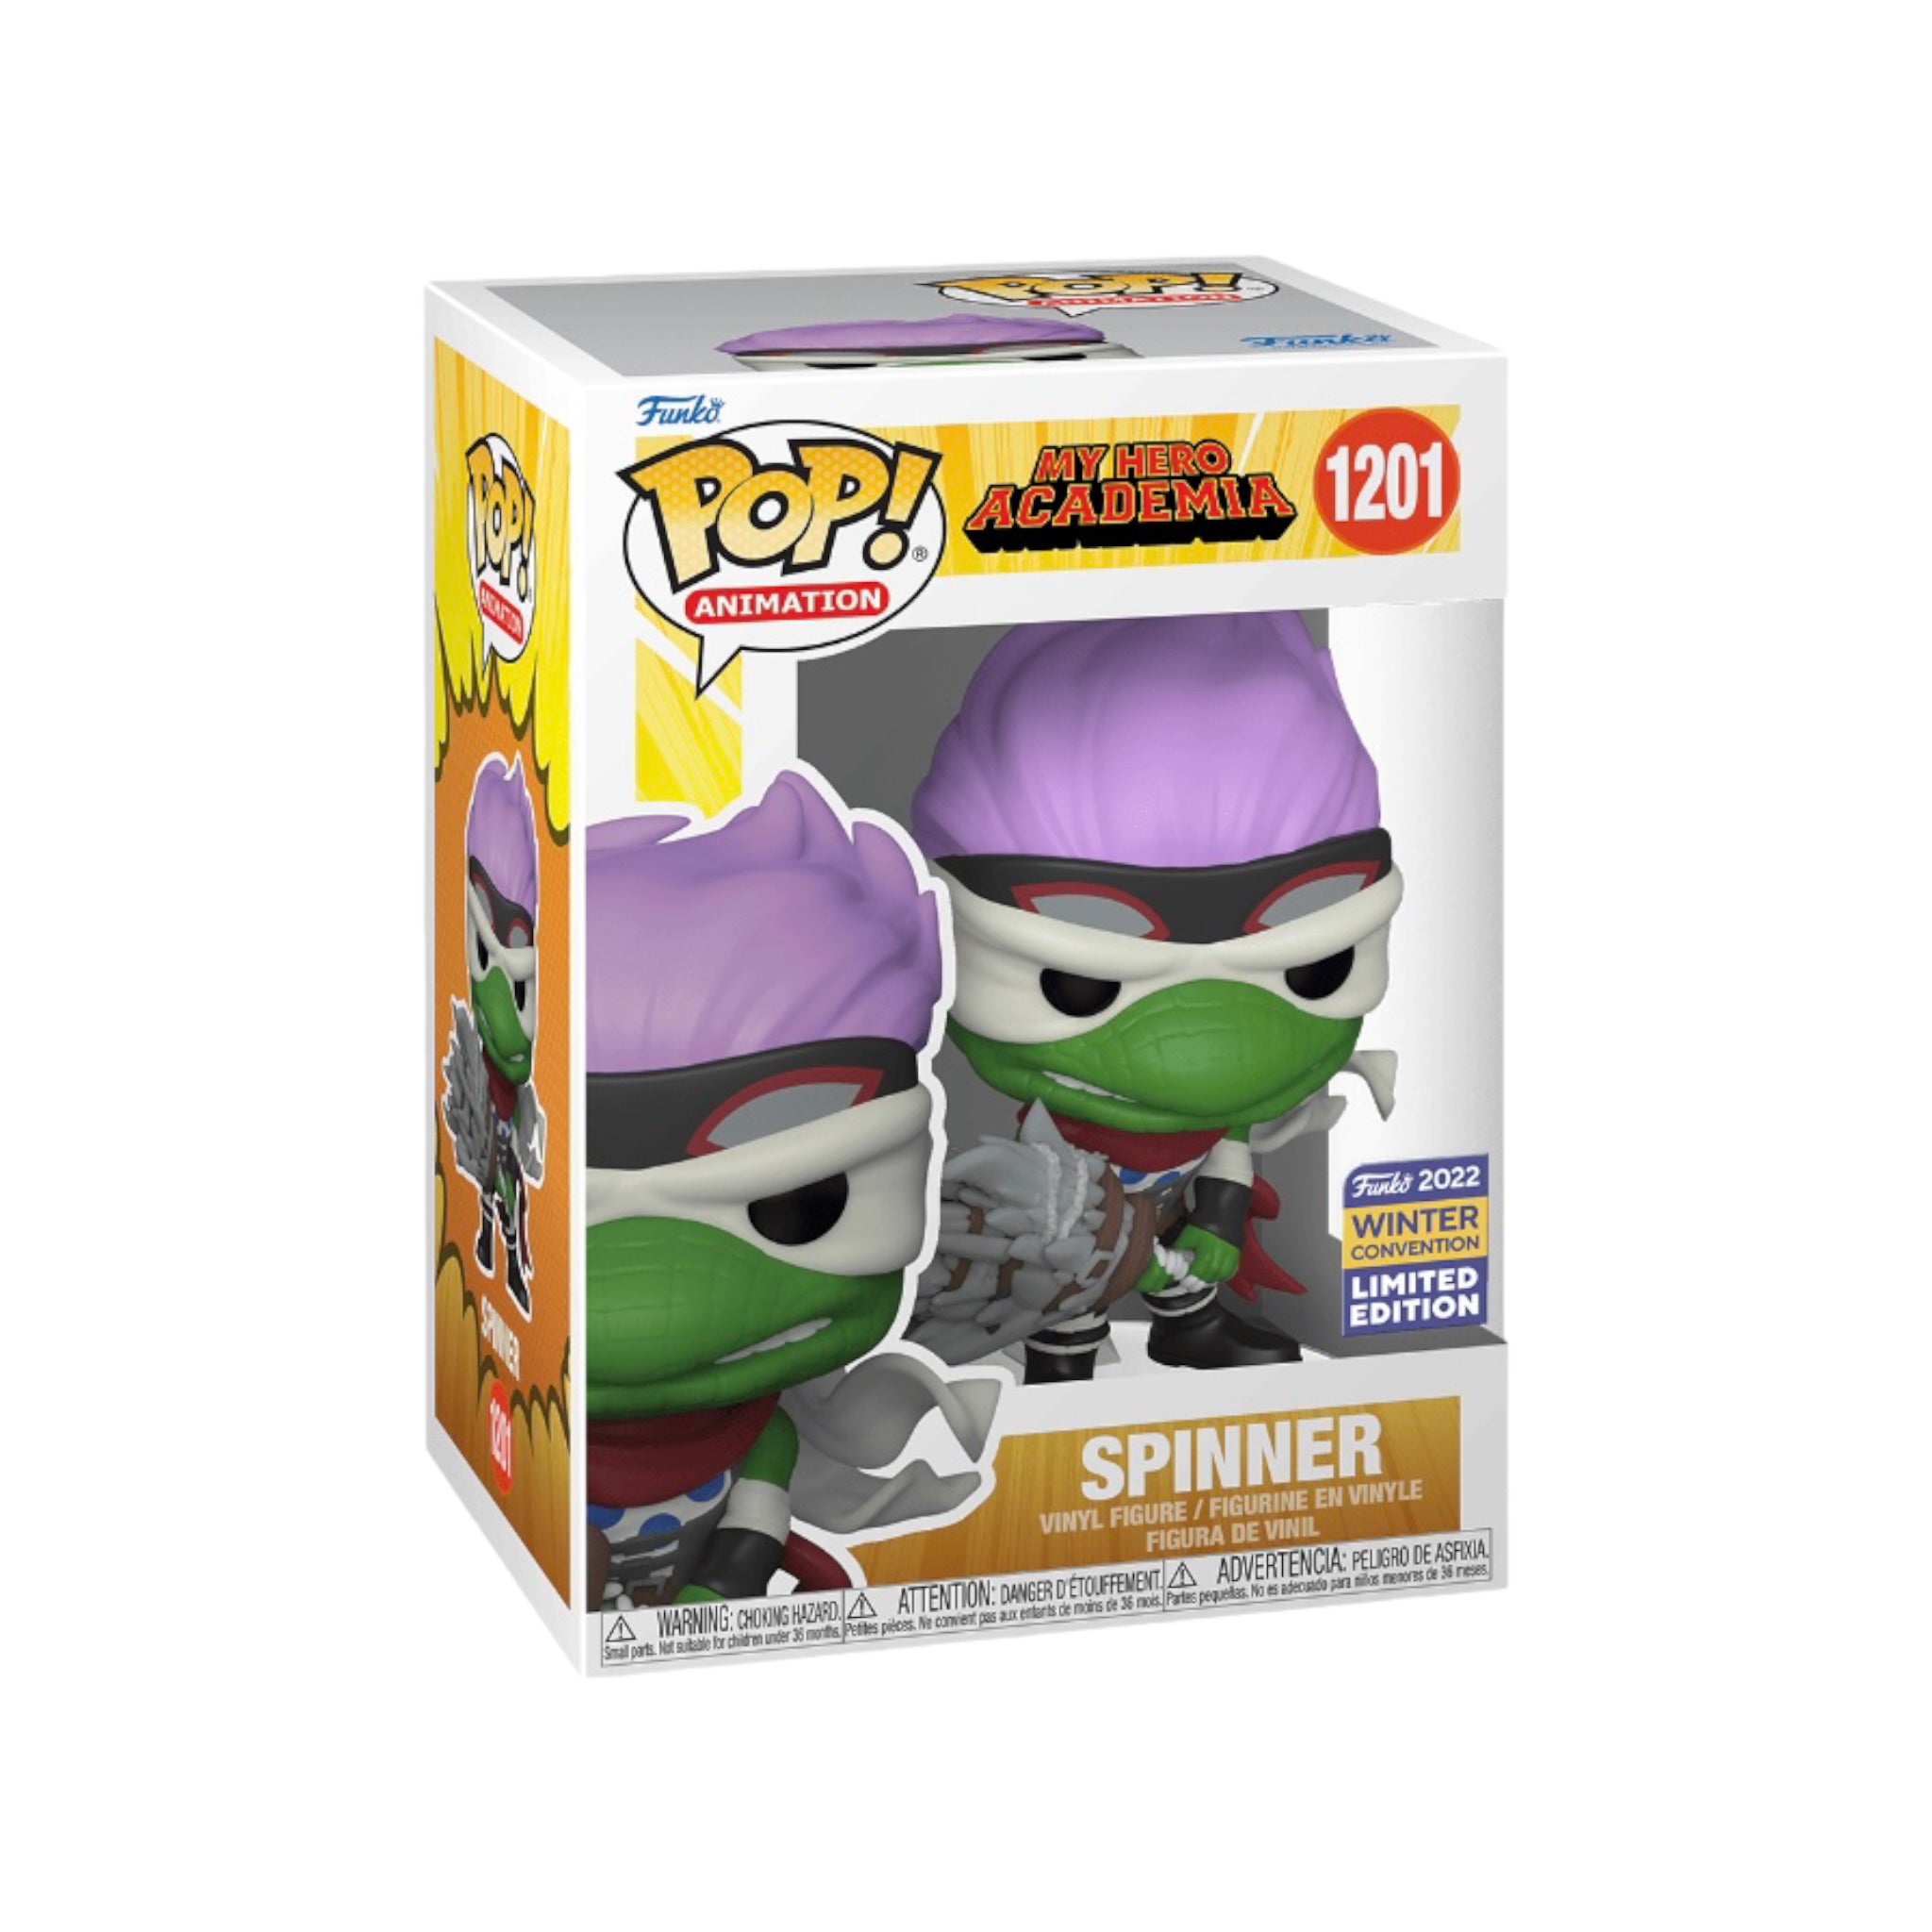 Spinner #1201 Funko Pop! - My Hero Academia - CCXP 2022 Shared Exclusive